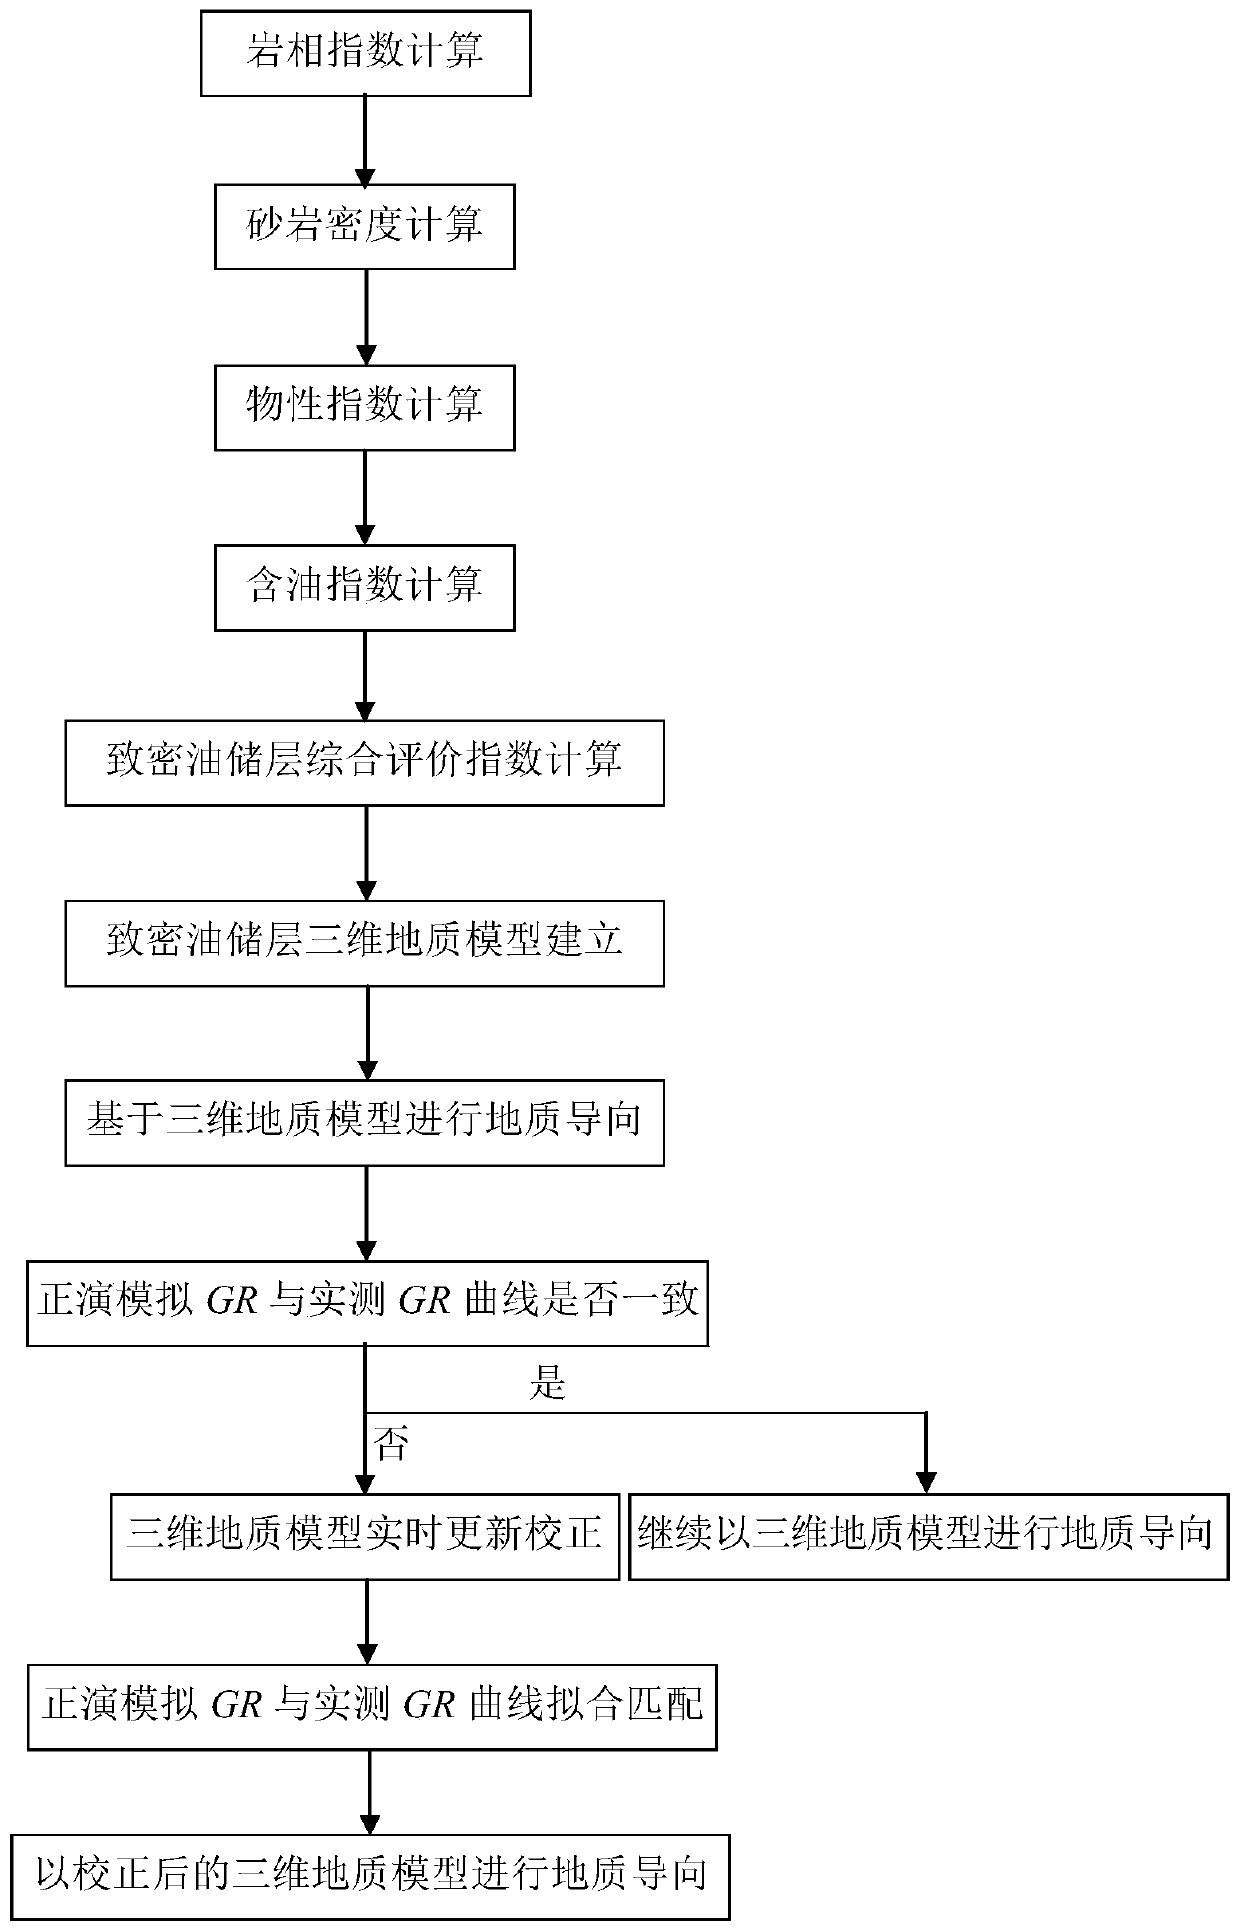 Method for increasing drilling rate of horizontal well tight oil reservoir